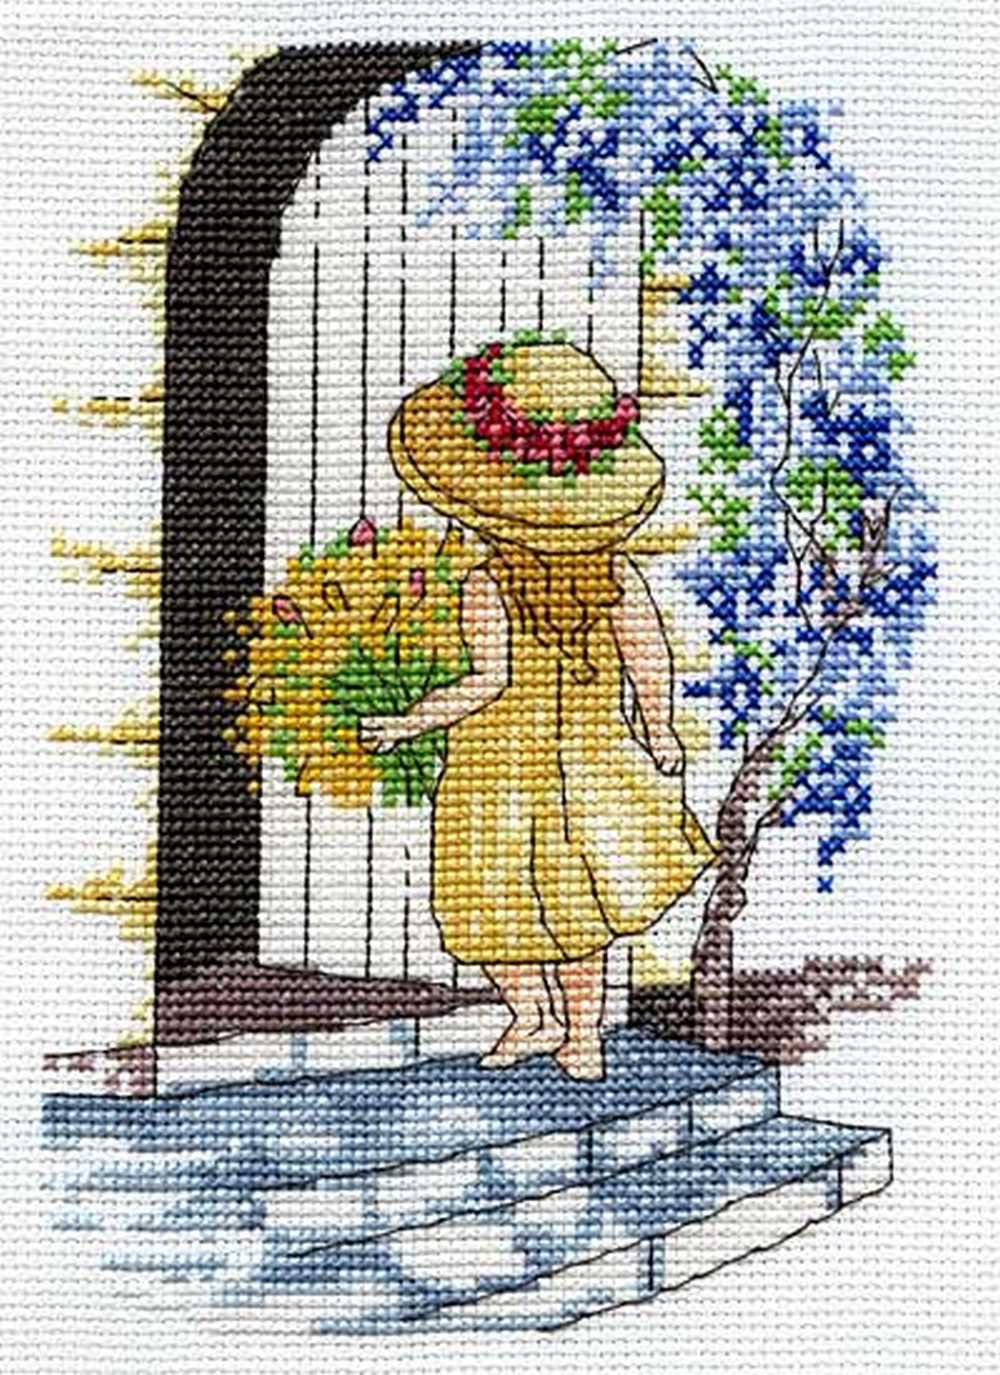 Wisteria - All Our Yesterdays Cross Stitch Kit SALE